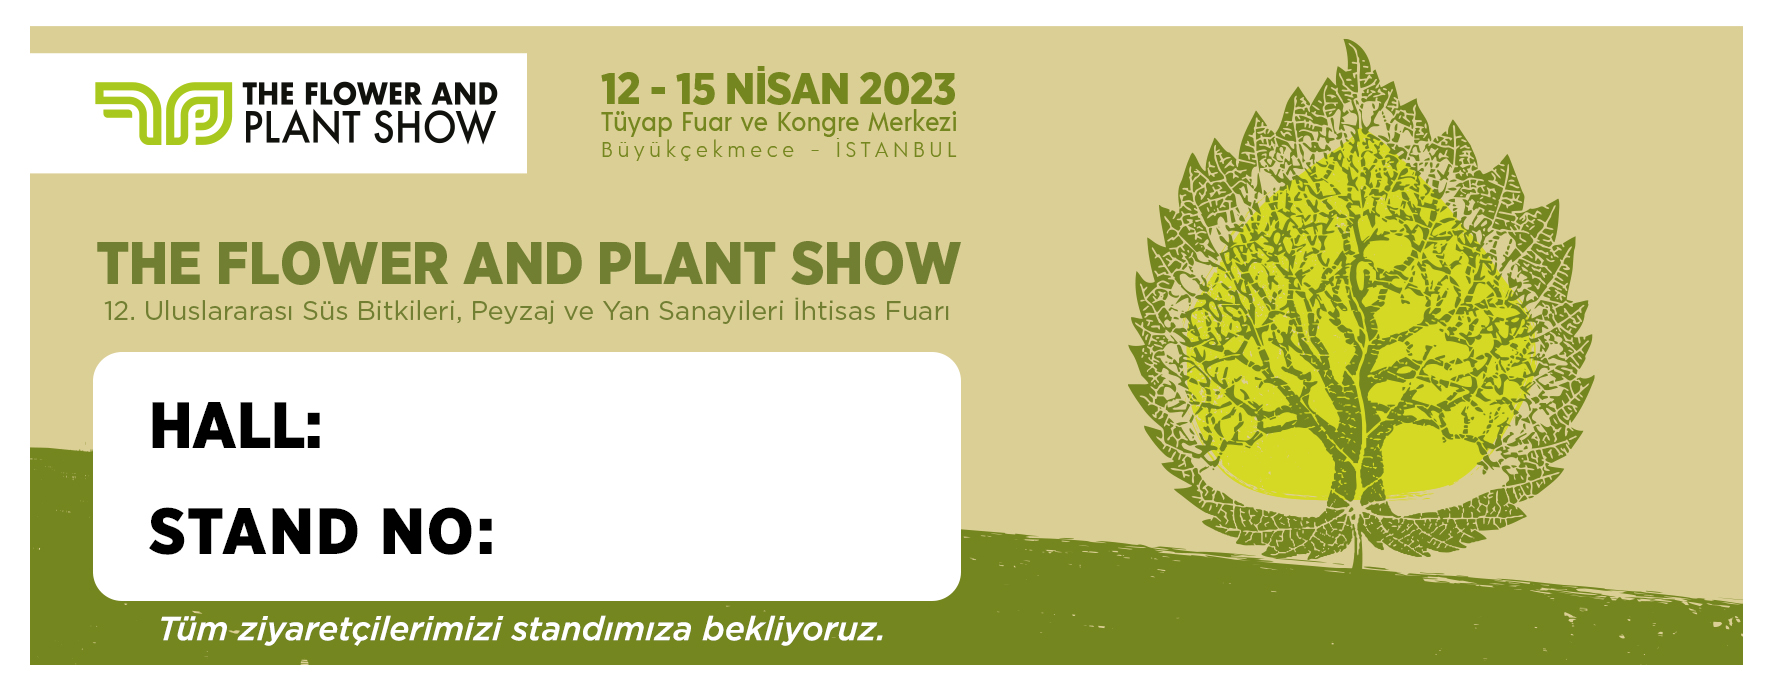 The Flower and Plant Show İmza